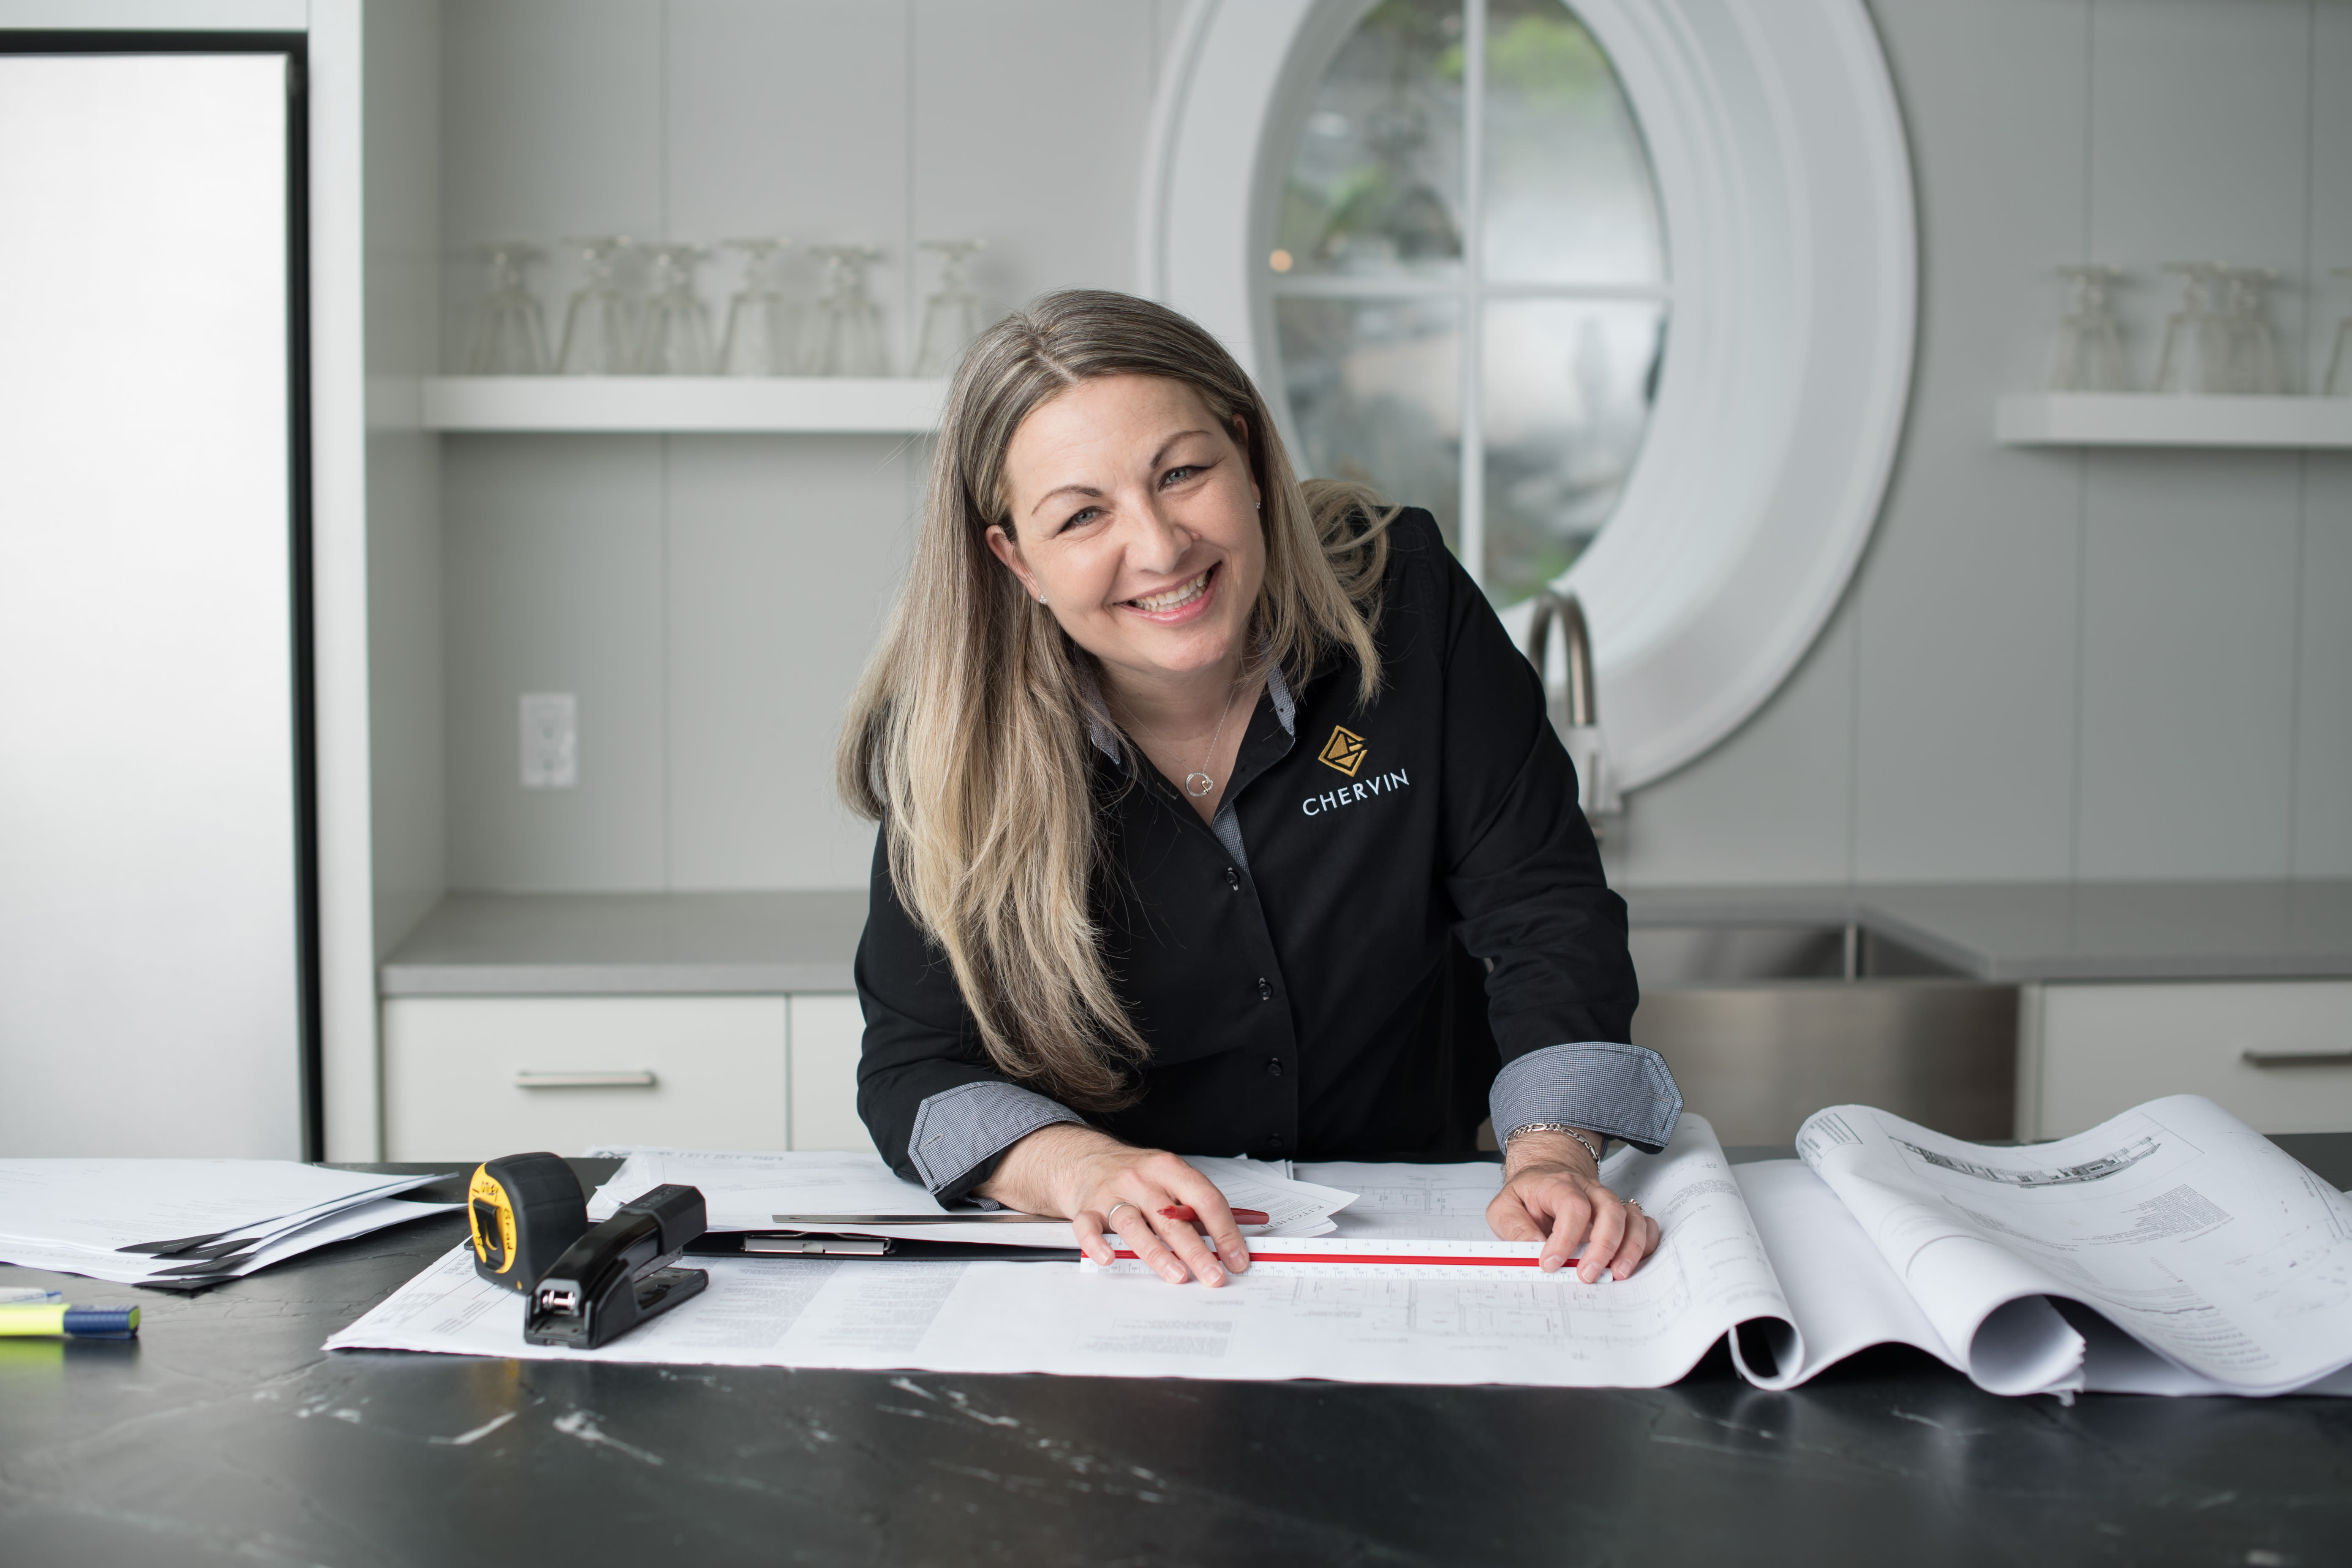 Photo of Chervin designer, Lisa, smiling at the camera with blueprints and tools spread out on a counter